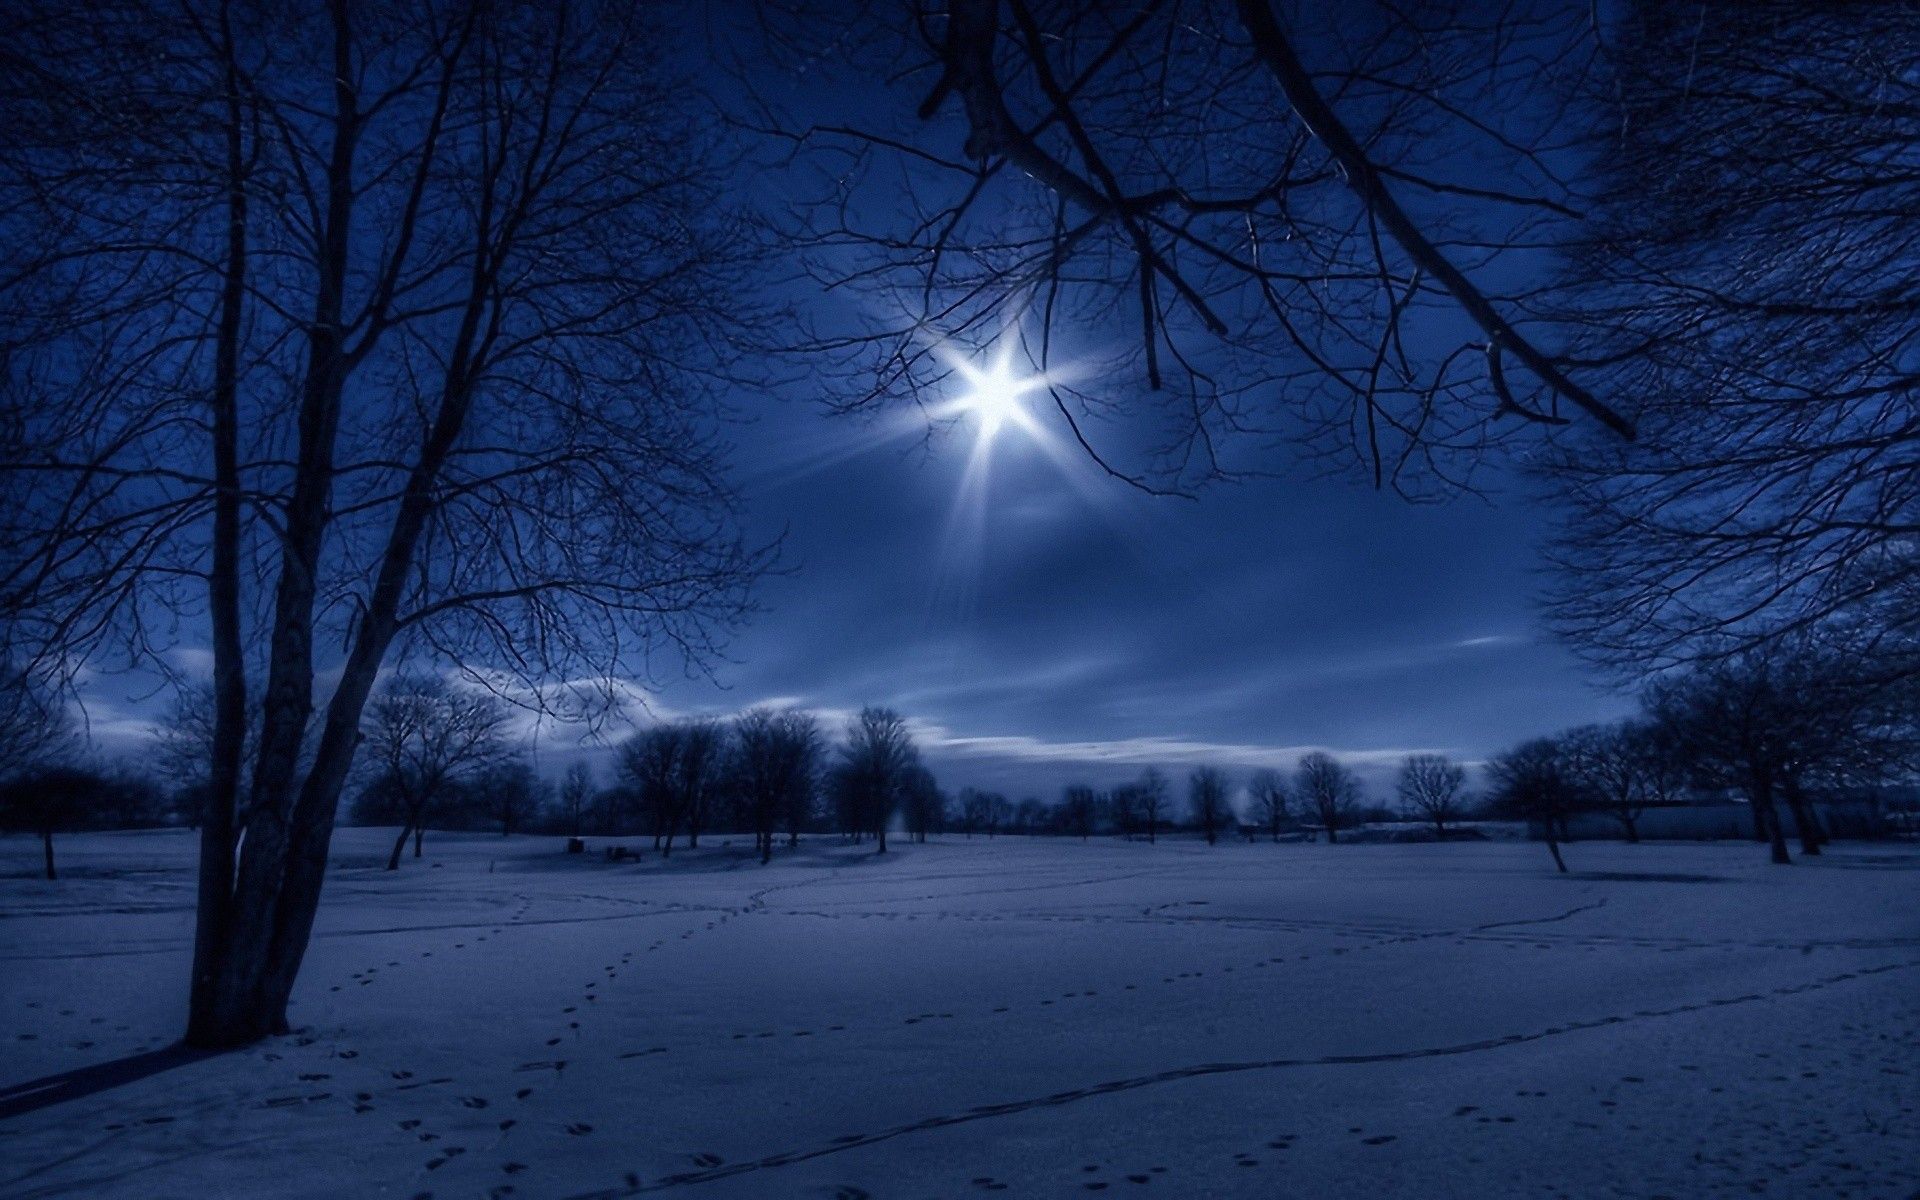 Winter Night Snowy Cool Wallpapers 3962 - HD Wallpapers Site